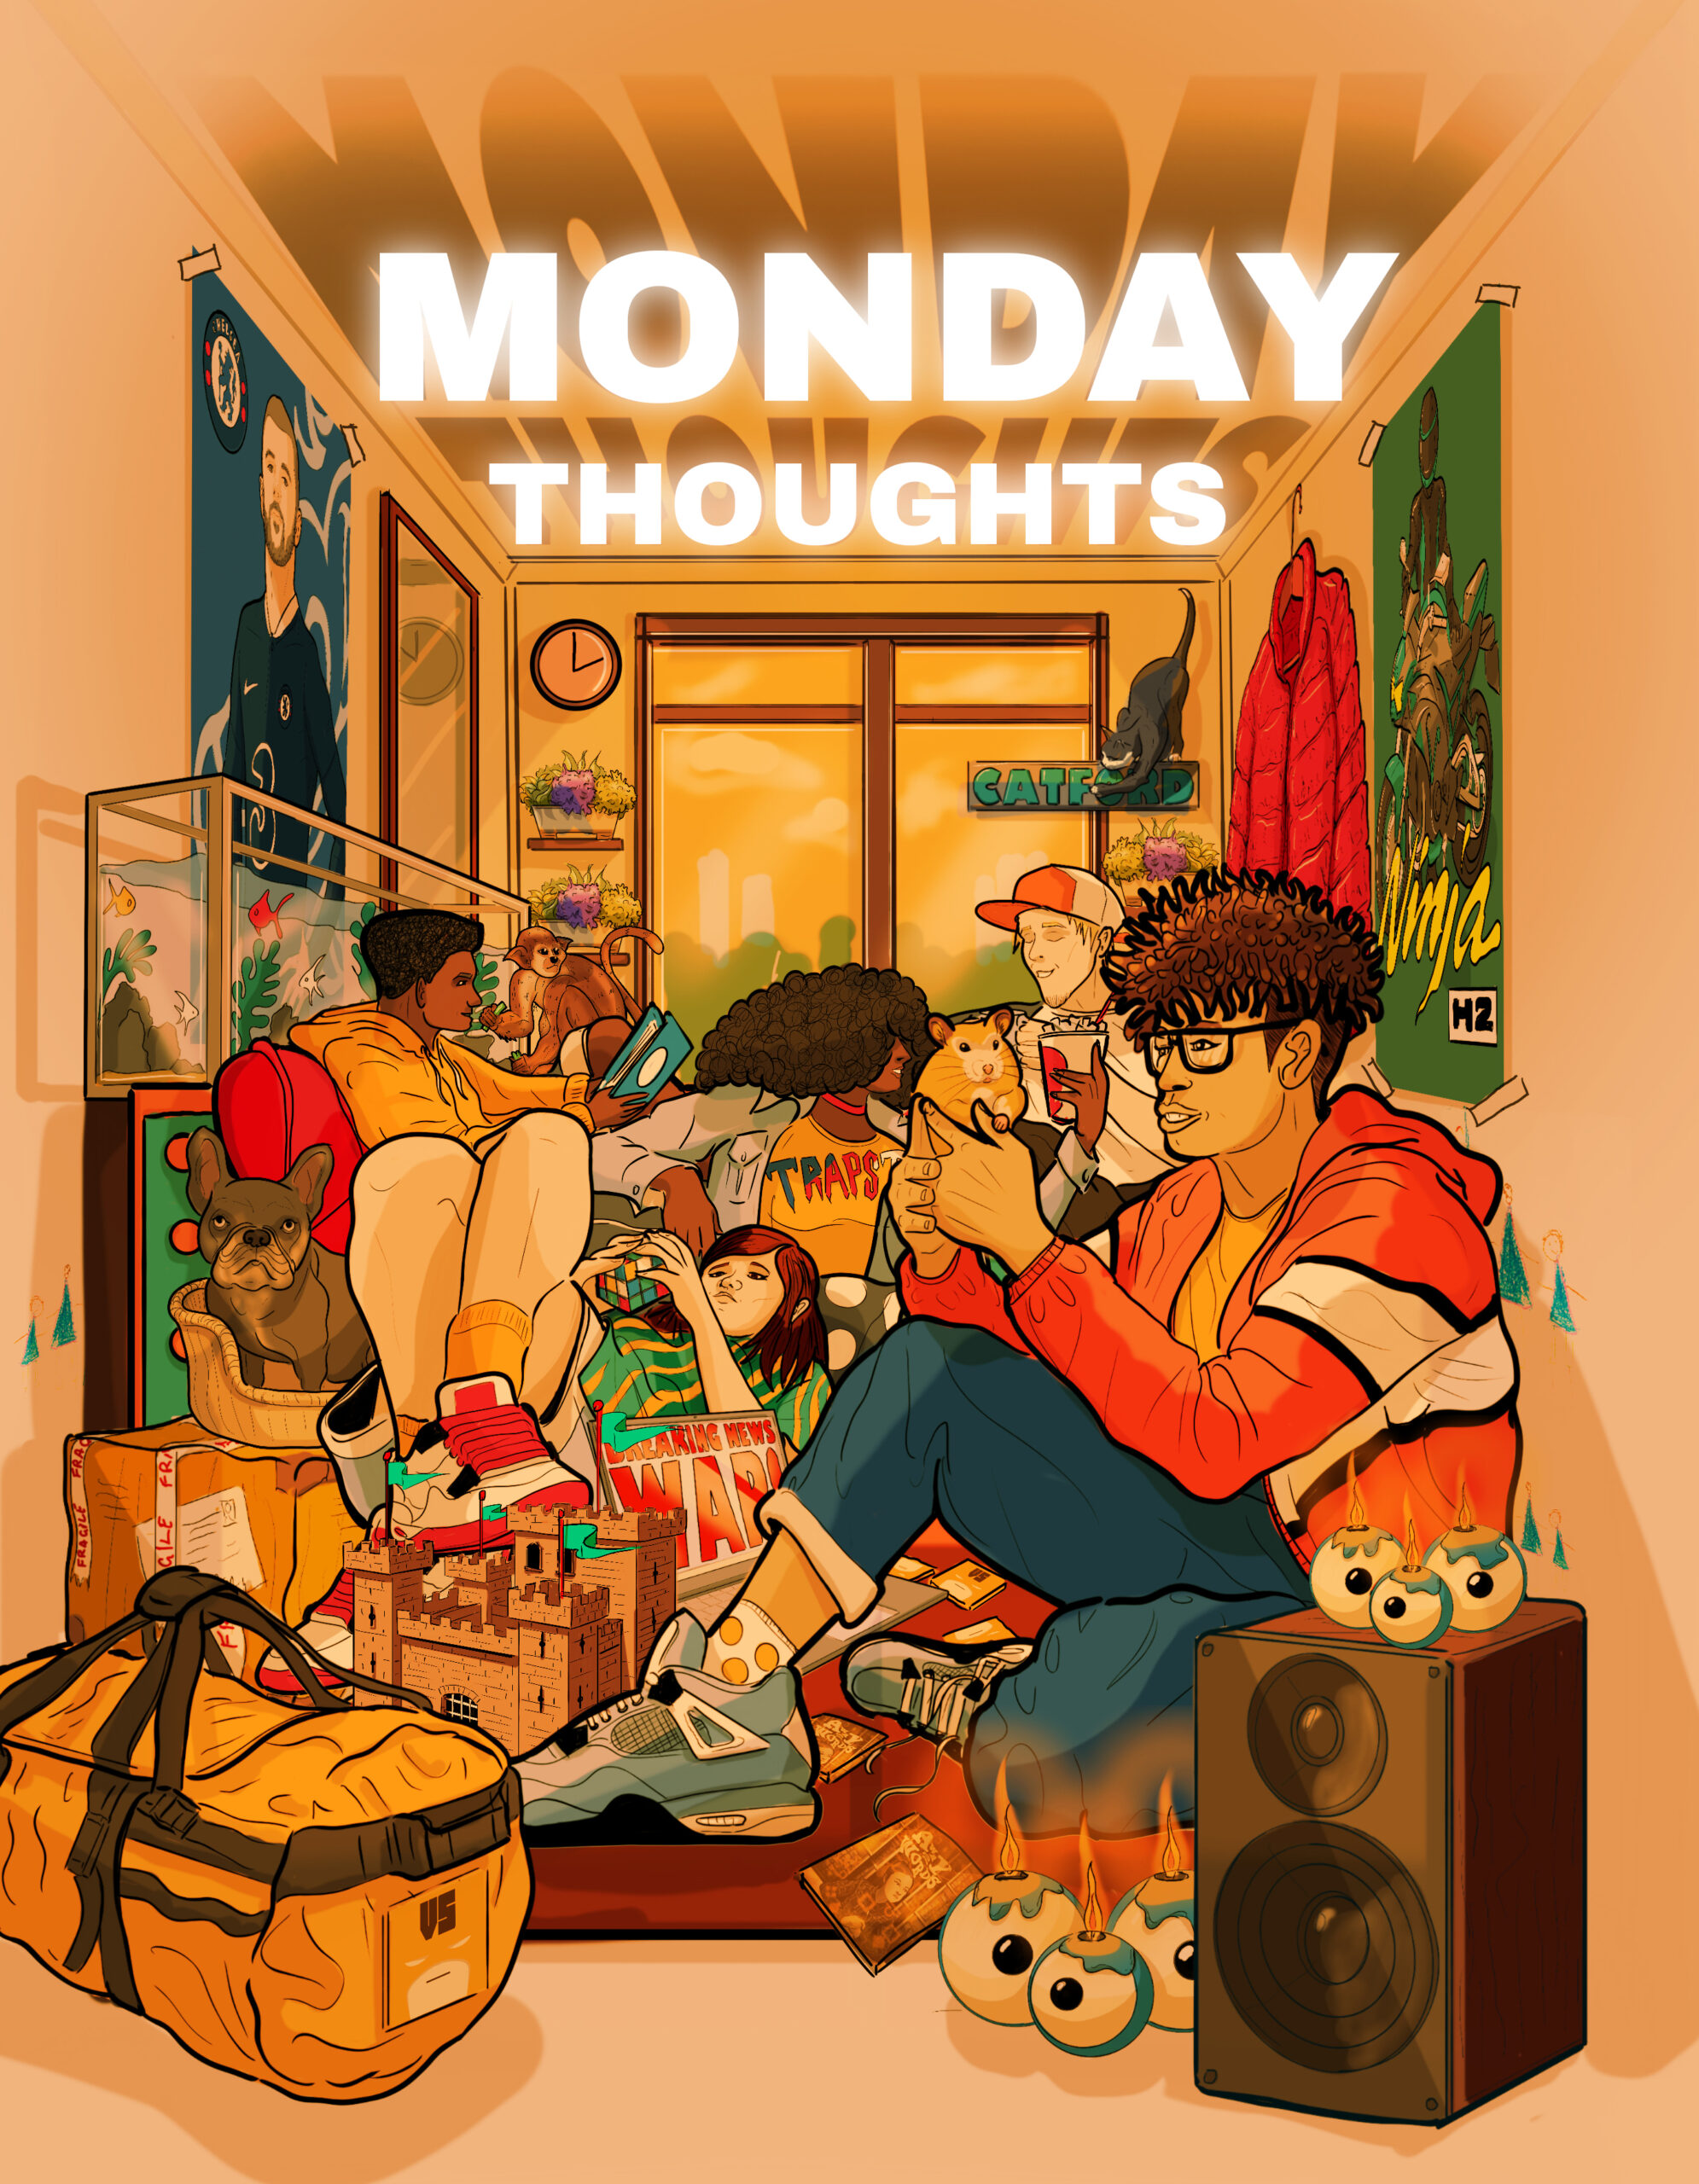 Cover of First Story Anthology for Abbey Manor College, titled Monday Thoughts